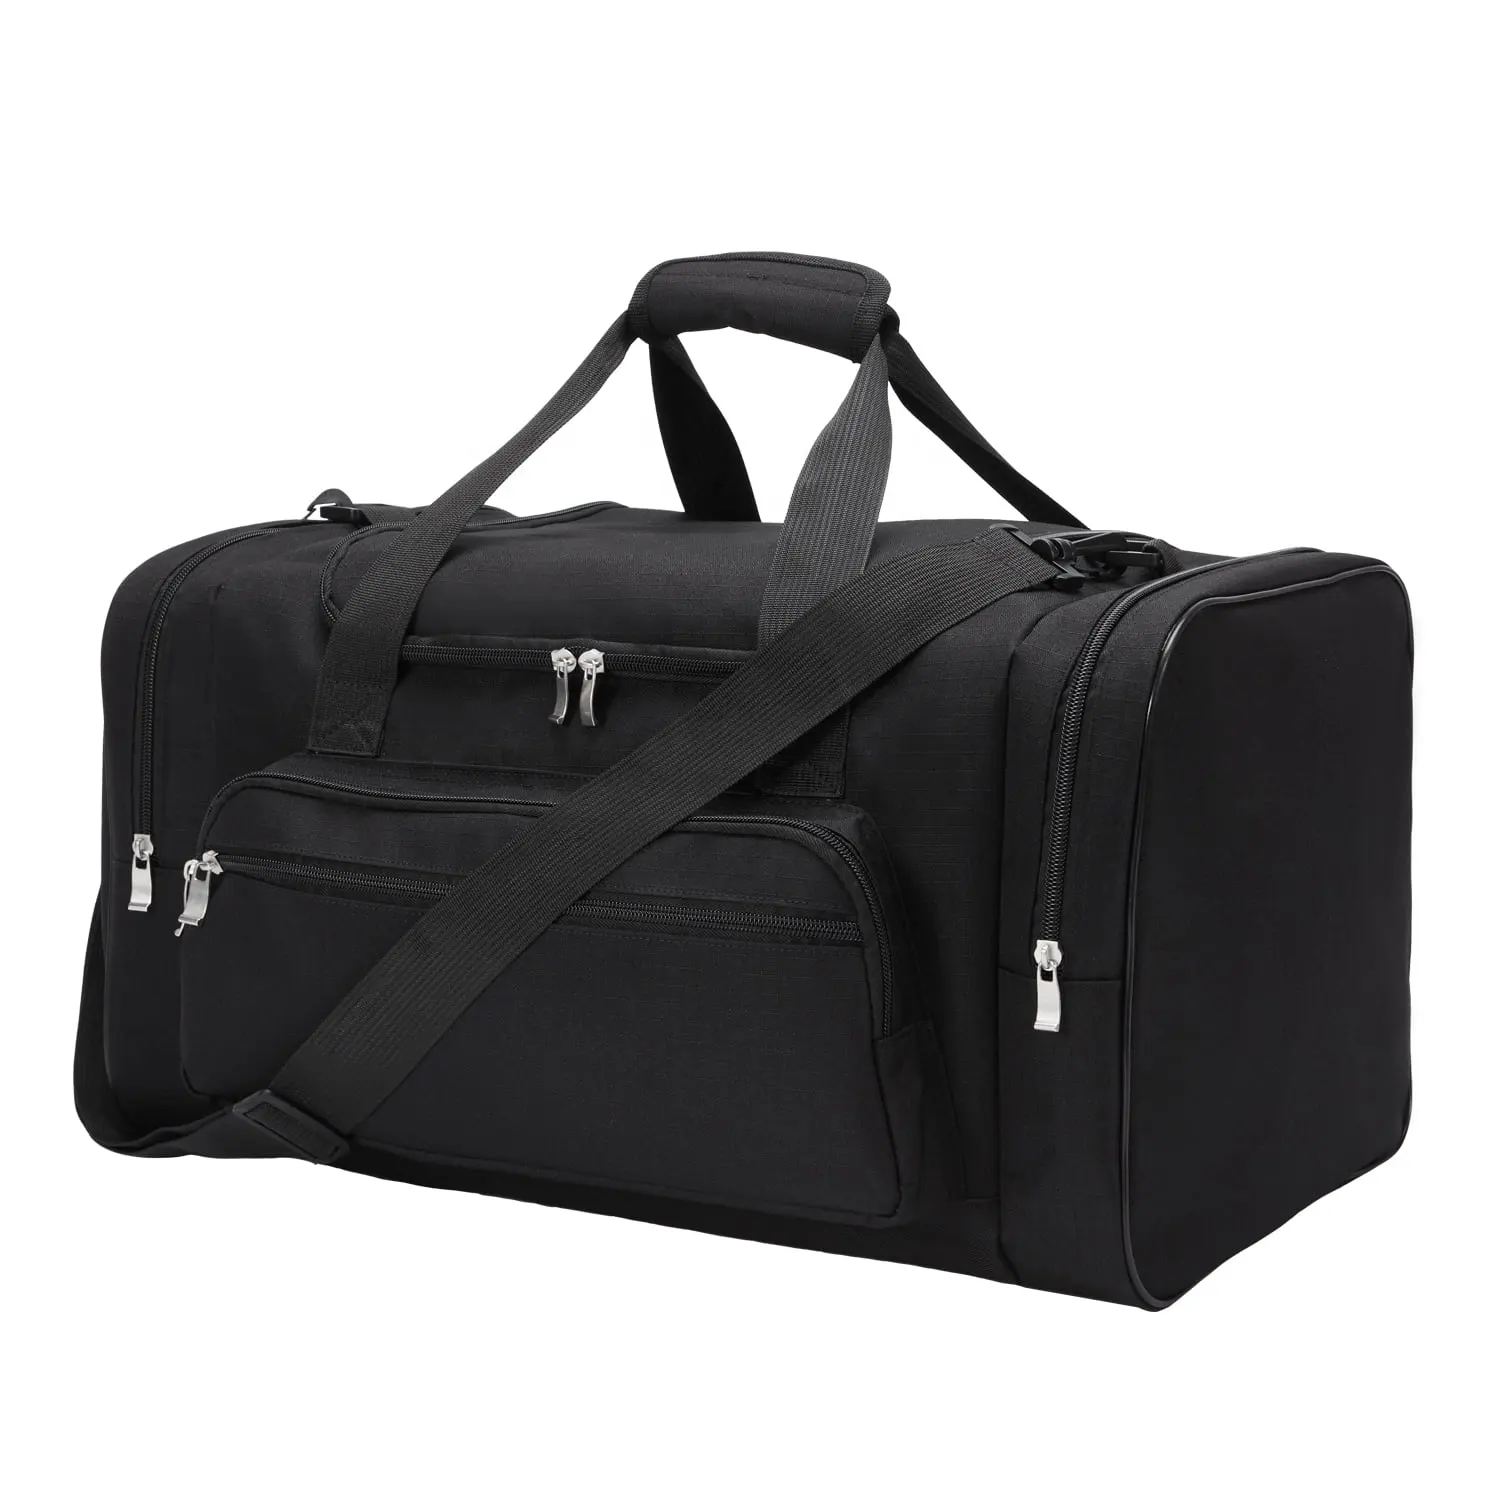 Large Capacity Bag Travel Waterproof Men's 20 Inch Gym Bag Duffel Bag With Shoe Compartment